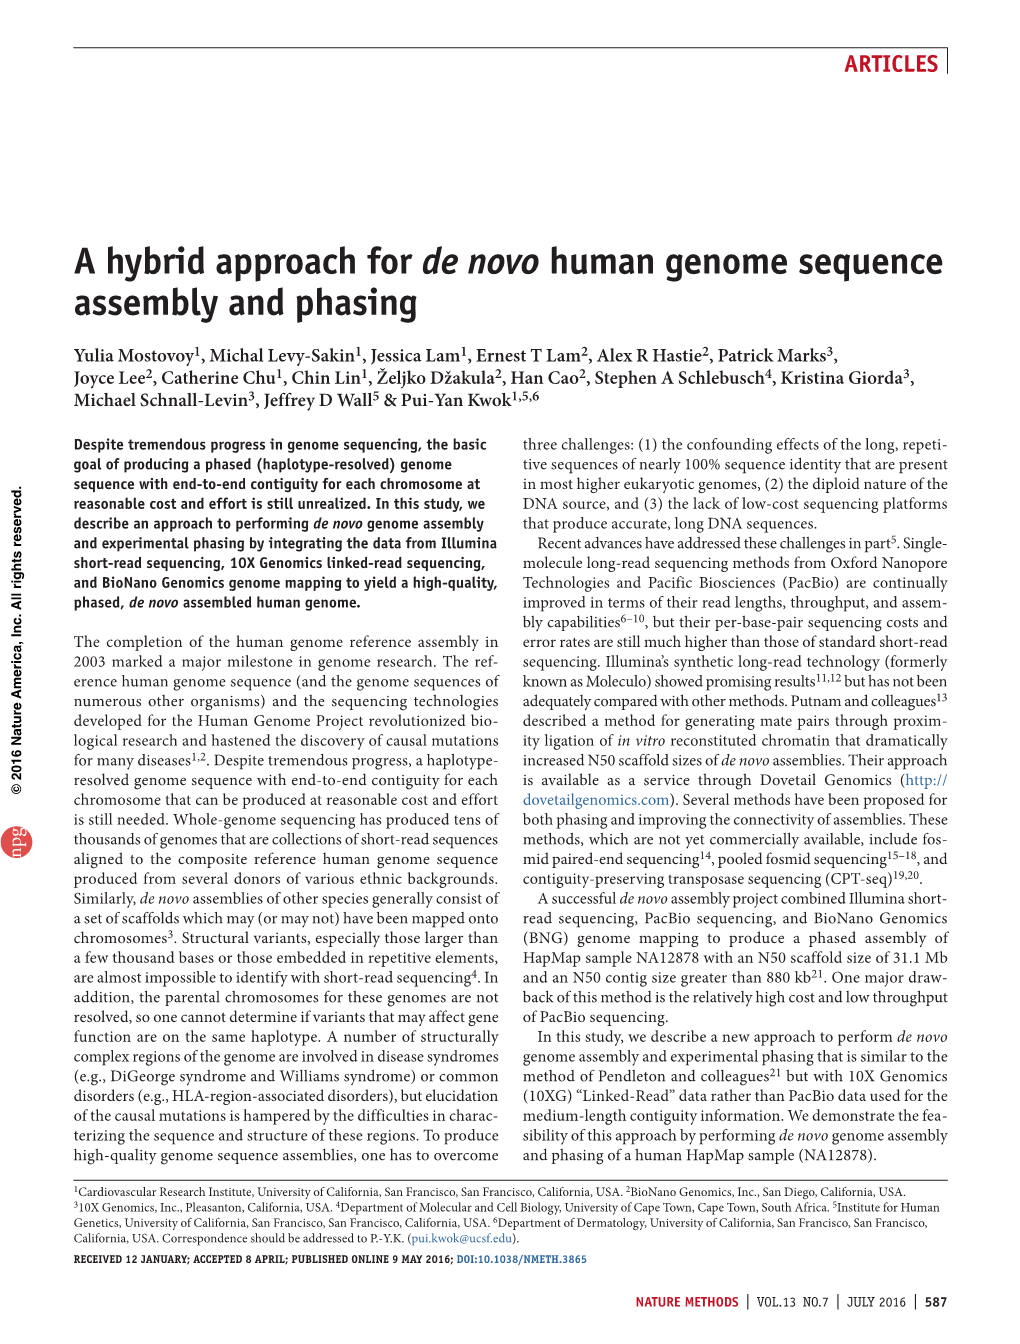 A Hybrid Approach for De Novo Human Genome Sequencing Assembly And